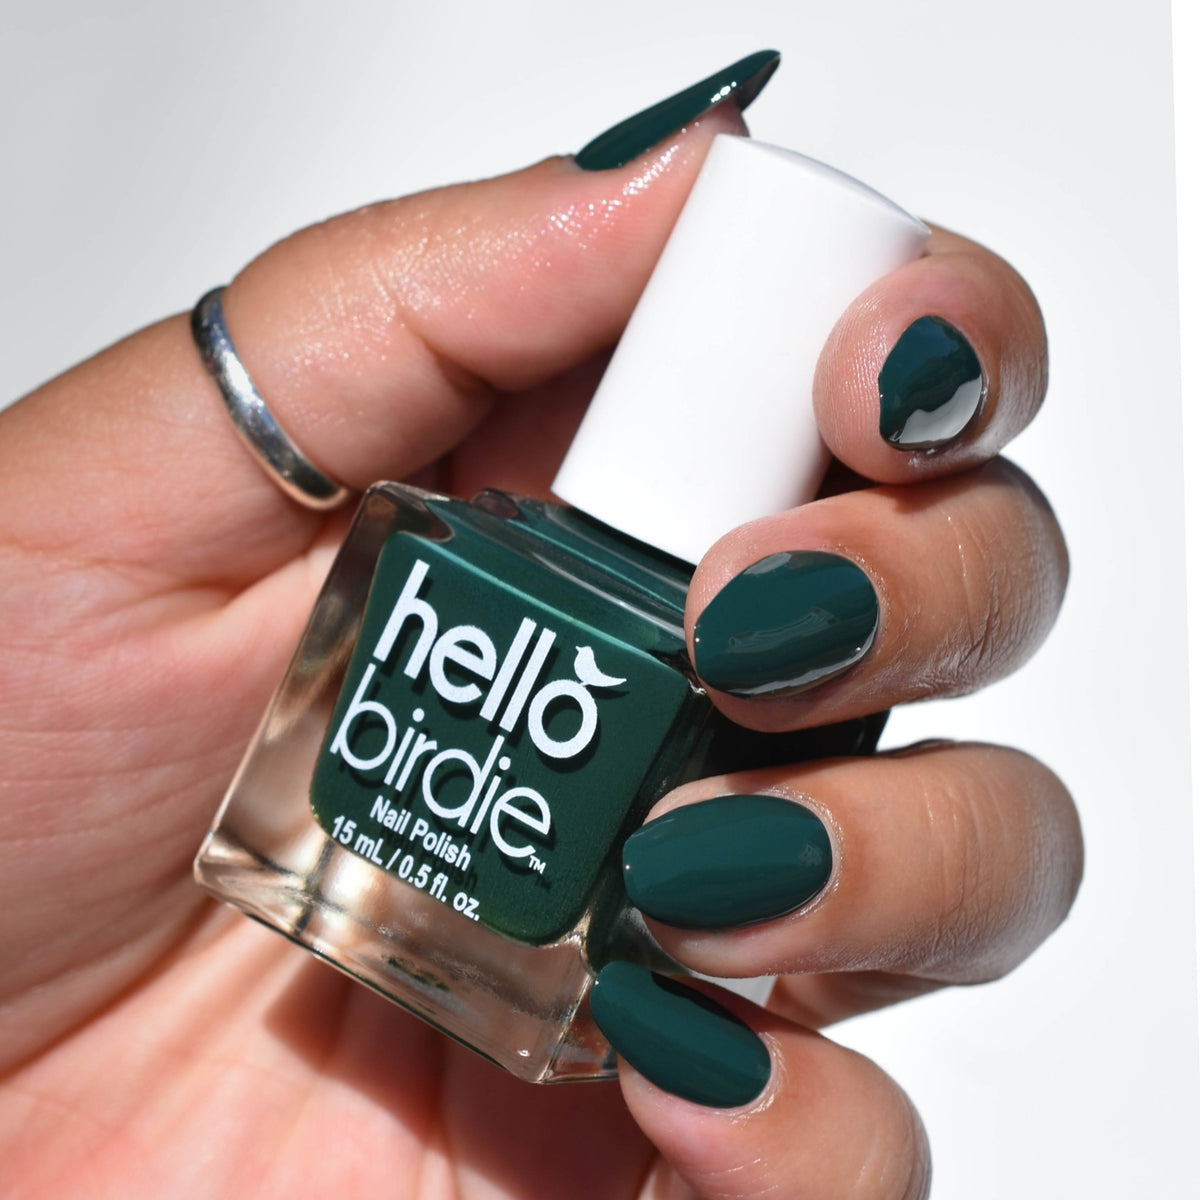 a Close up of a bottle of No Harm No Fowl nail polish from Hello Birdie. The polish is a dark green hue and is on the nails, the skin tone is medium. The thumb has a silver ring and the background is white